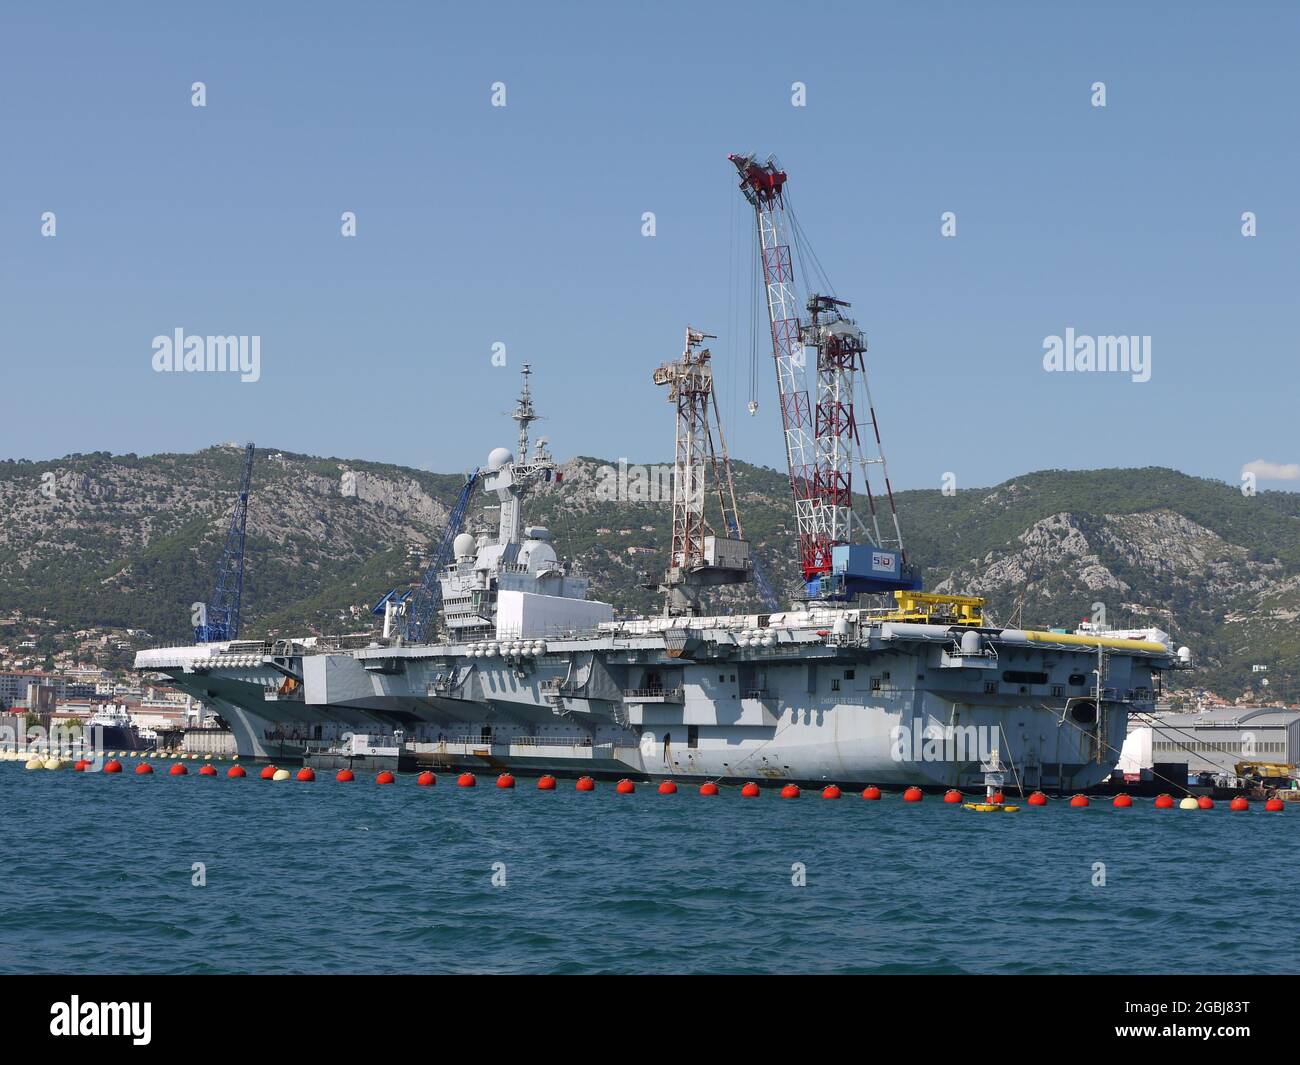 The French aircraft carrier Charles de Gaulle undergoes some repairs in the military port of Toulon, France Stock Photo